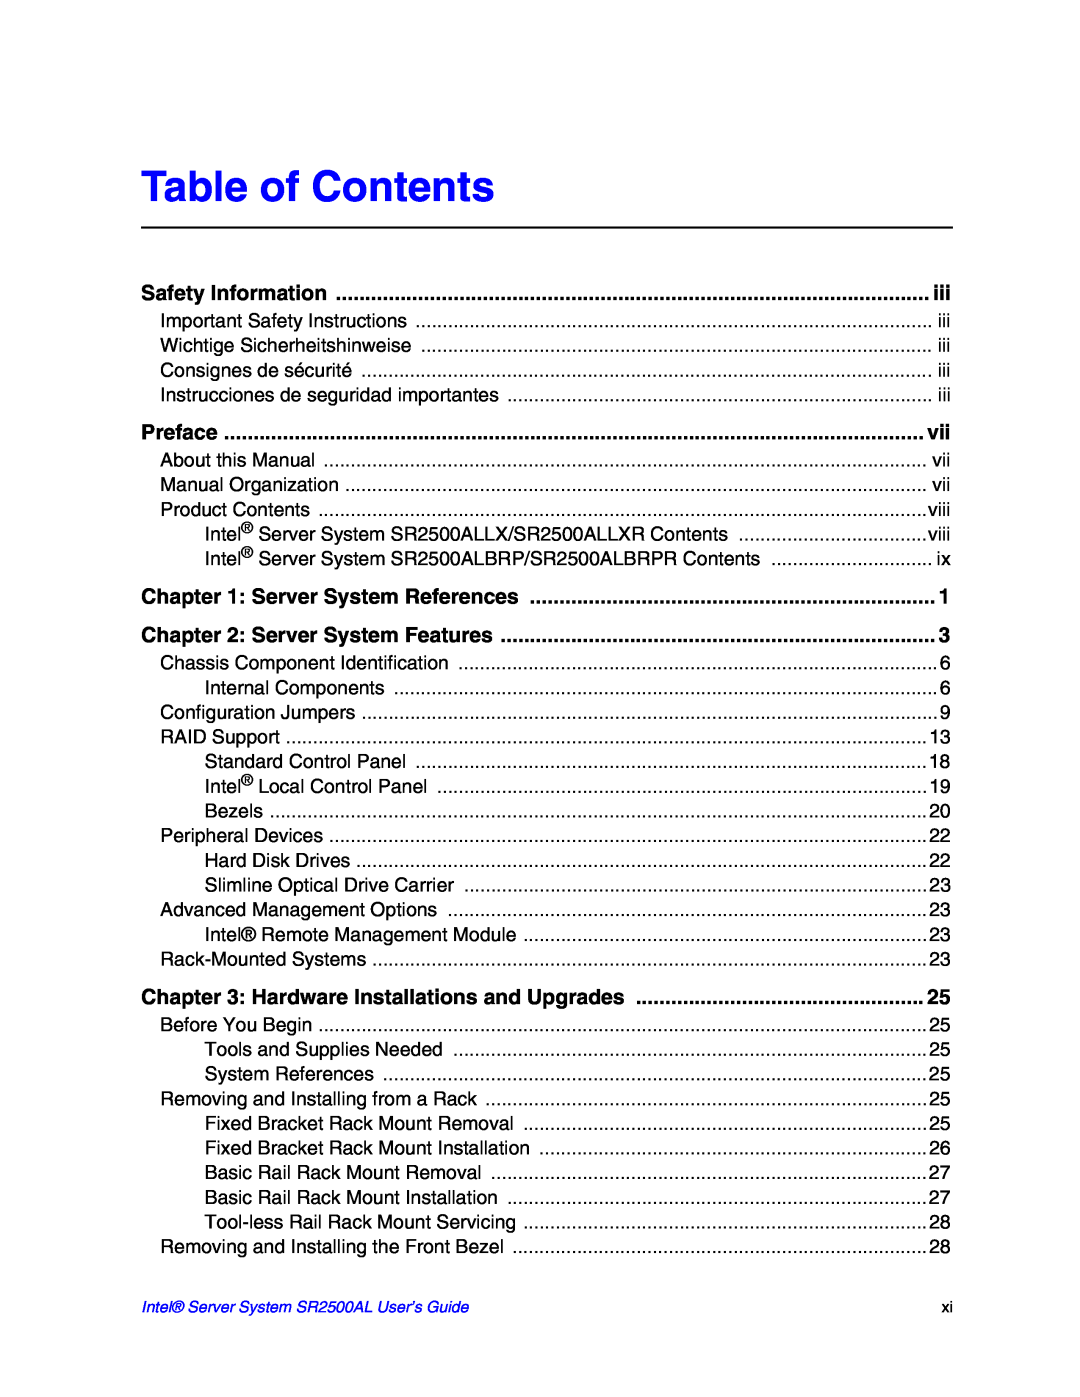 Intel SR2500AL manual Table of Contents, Safety Information, Preface, Server System References, Server System Features 